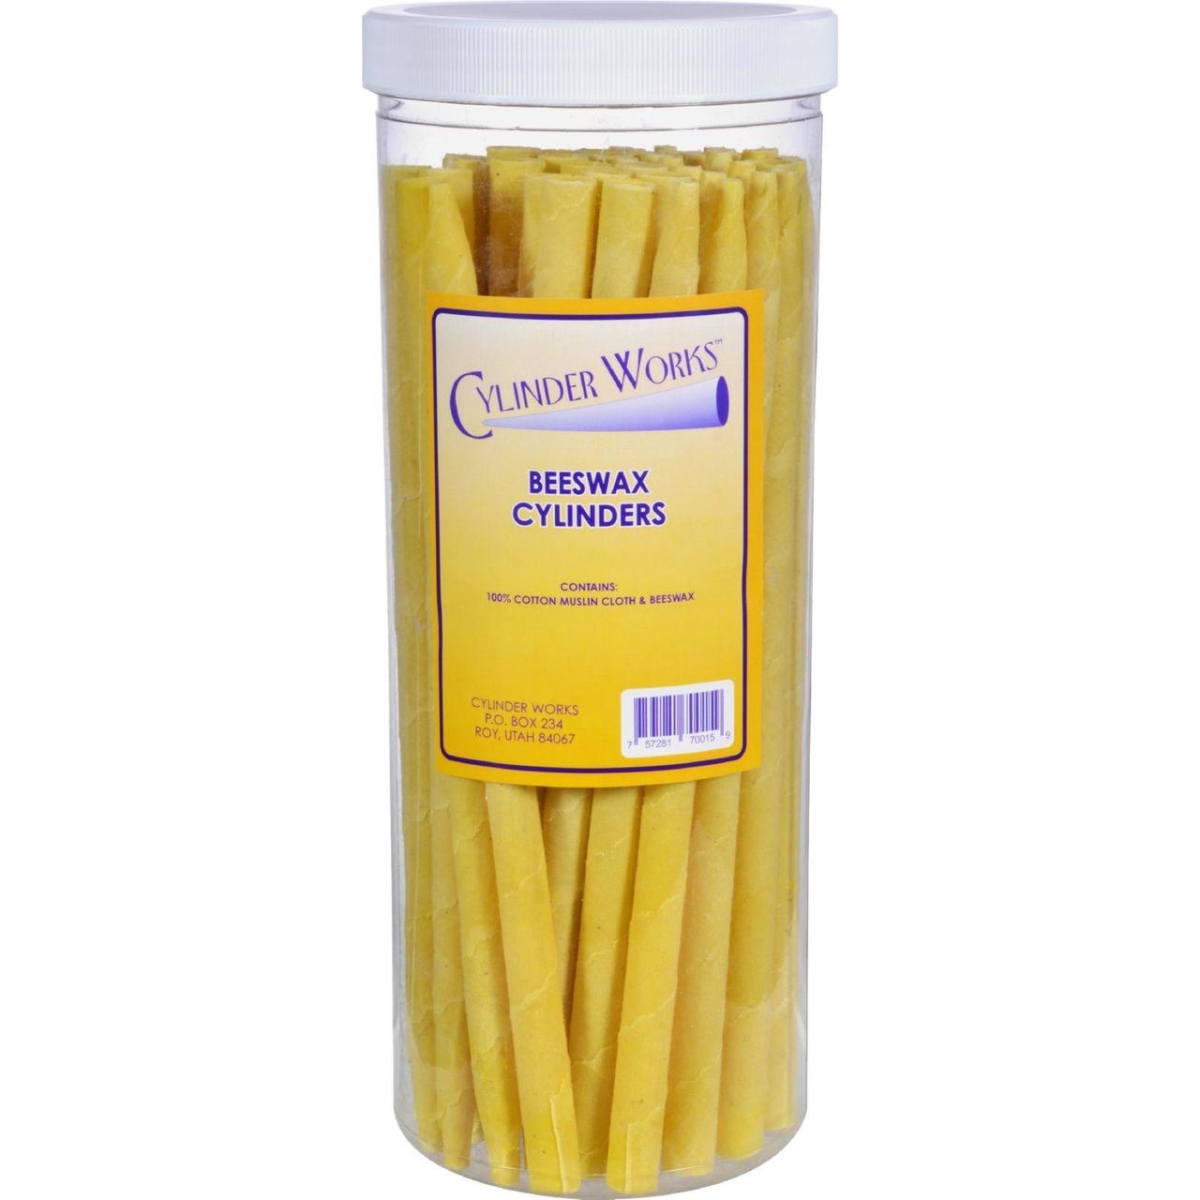 Hg0409839 Herbal Beeswax Ear Candles - Pack Of 50